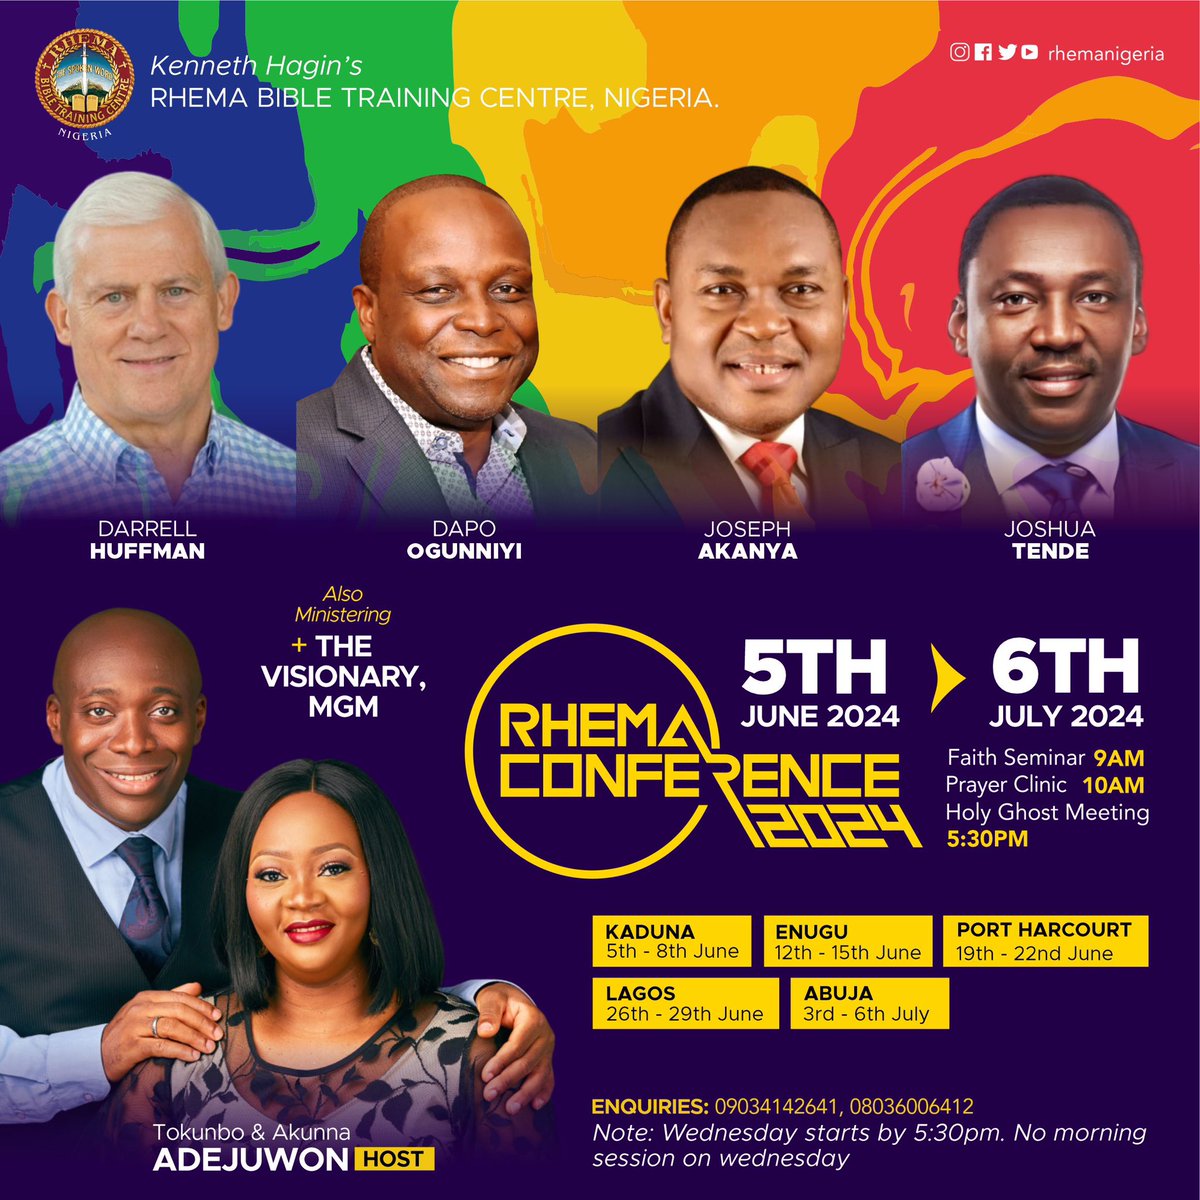 RHEMA CONFERENCE 2024 IS HERE! It kicks off on the 5th of June through to the 6th of July, 2024. This year, we have a line up of seasoned speakers. ARE YOU READY??????? . . . #RhemaConference24 #RC24 #FaithSeminar #PrayerClinic #HolyGhostMeeting